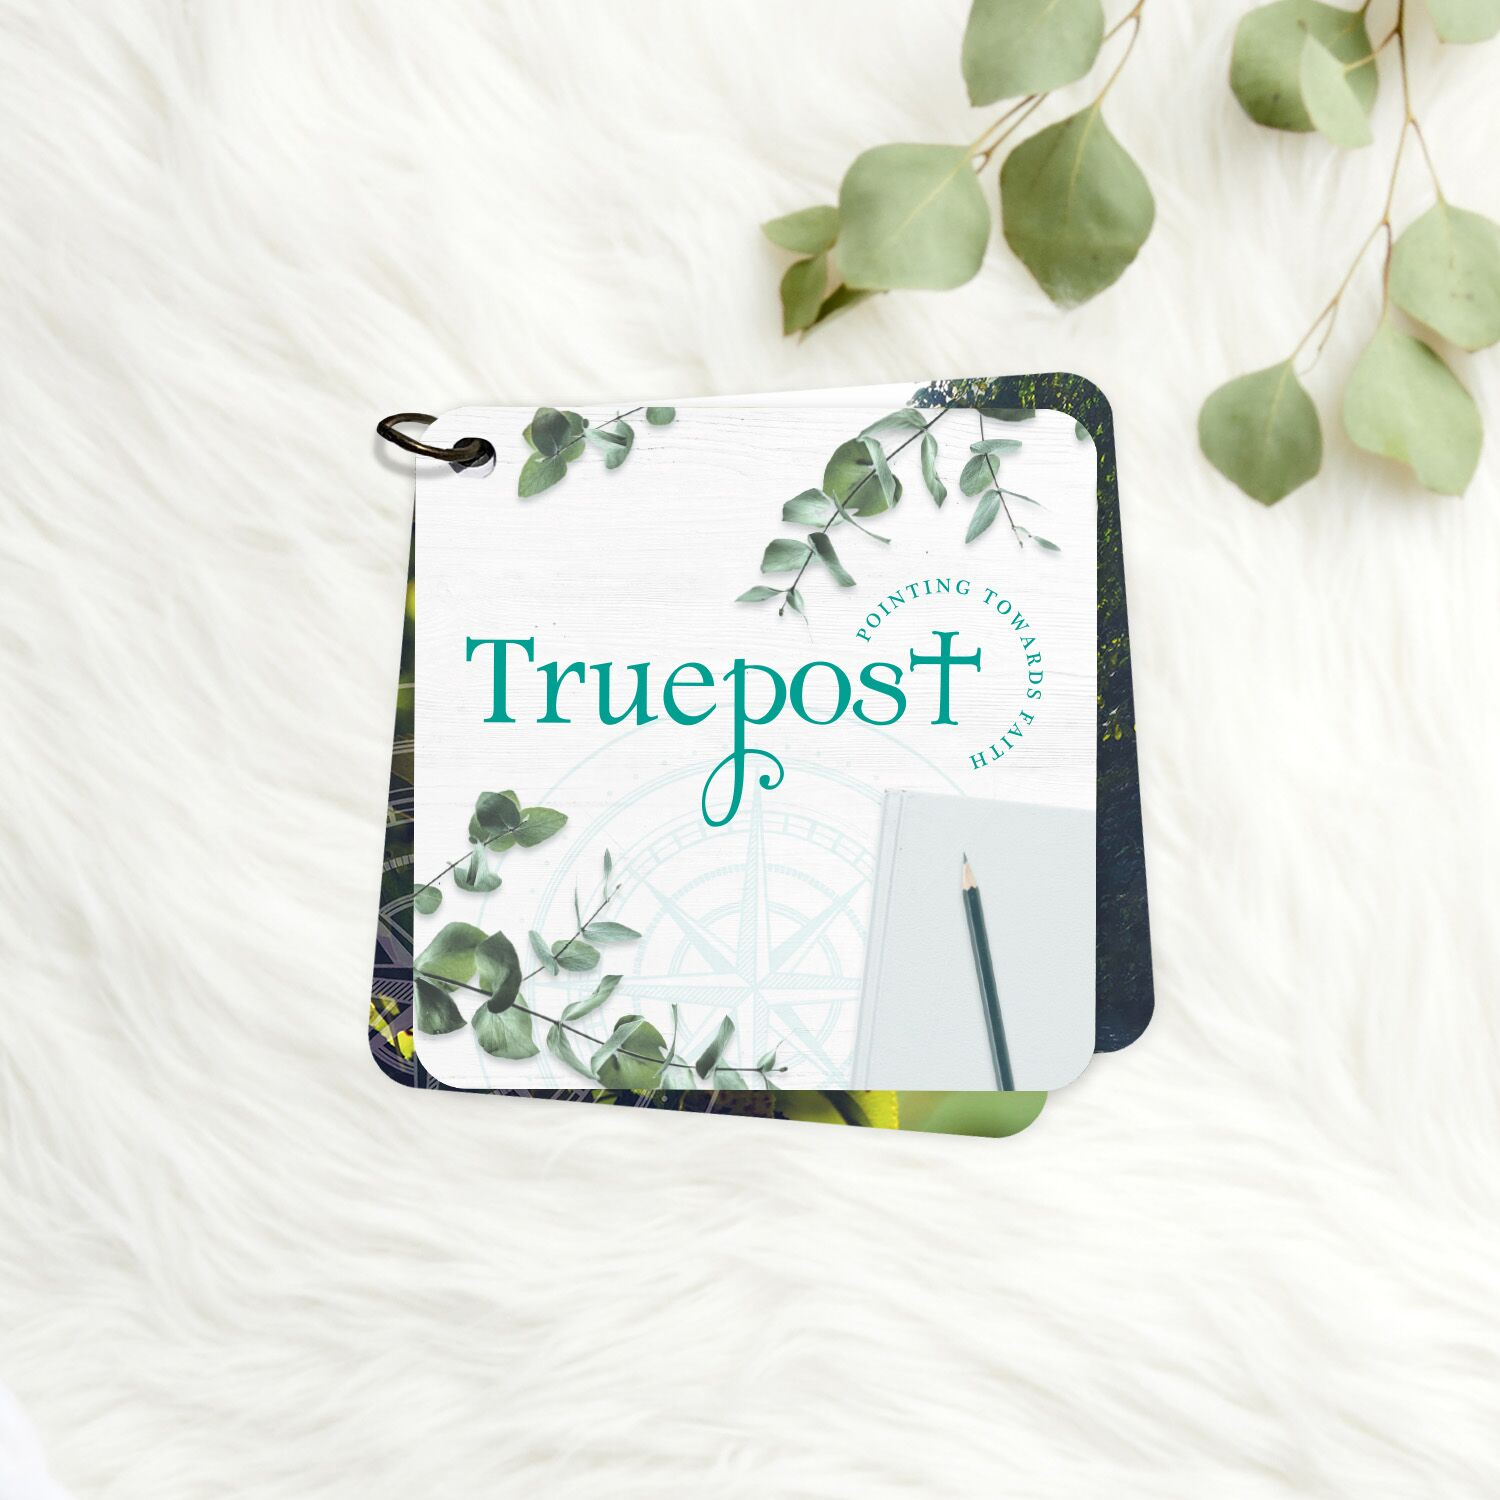 Truepost empower cover with eucalyptus. Bible verse gift idea. Gifts with Bible verses on them.